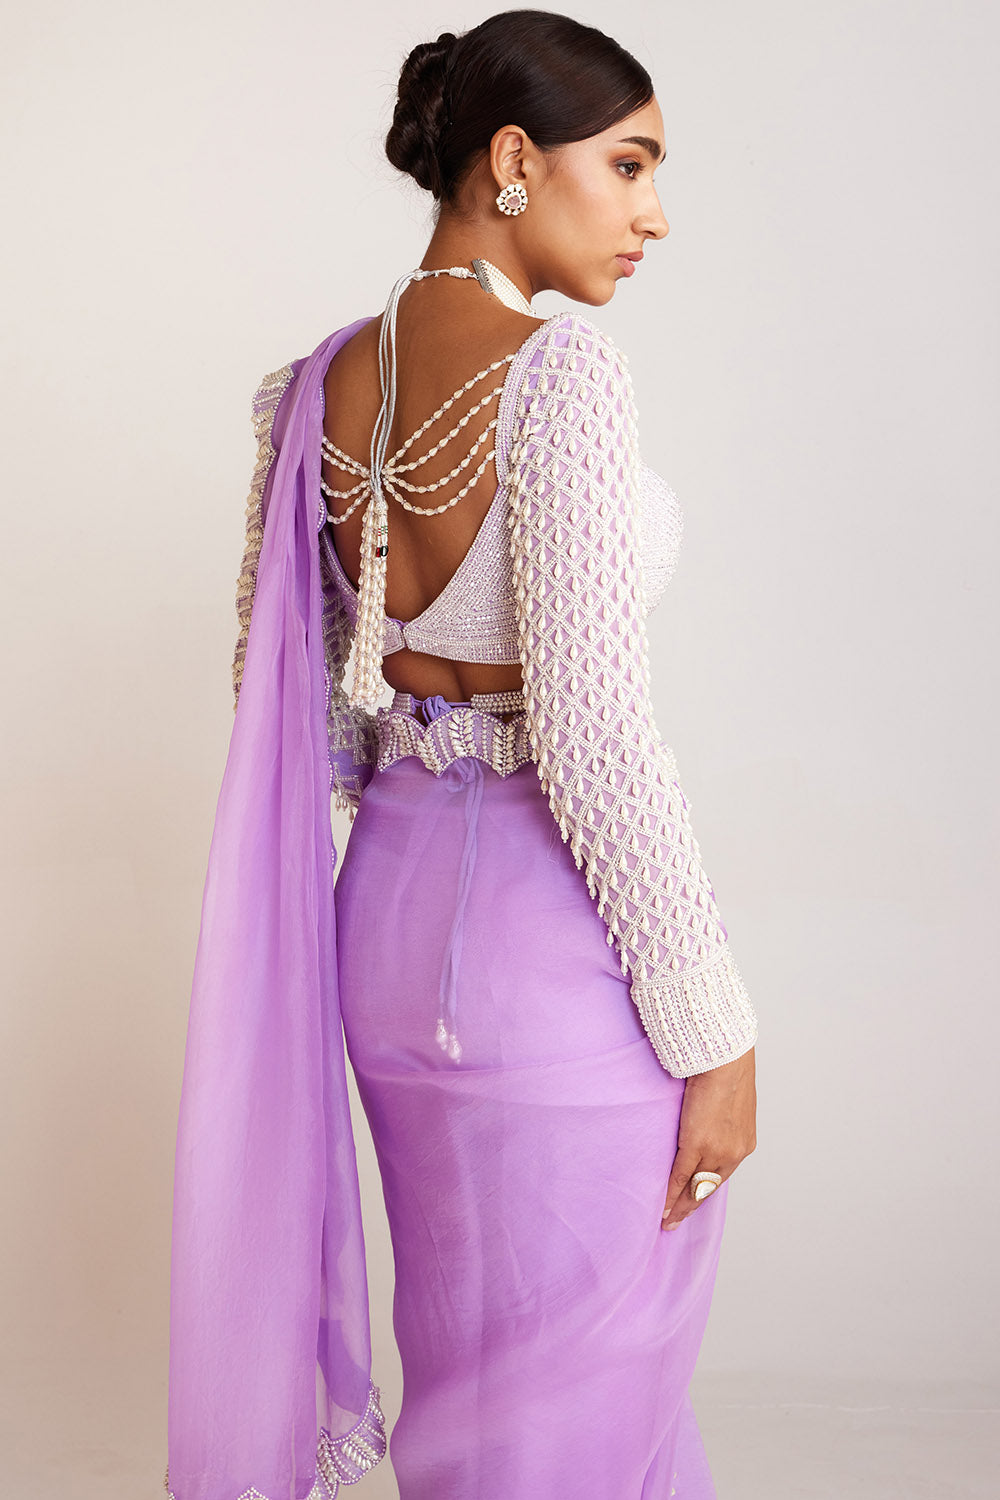 Vvani by Vani Vats  Lilac Pearl Embellished Saree – LIVEtheCOLLECTIVE